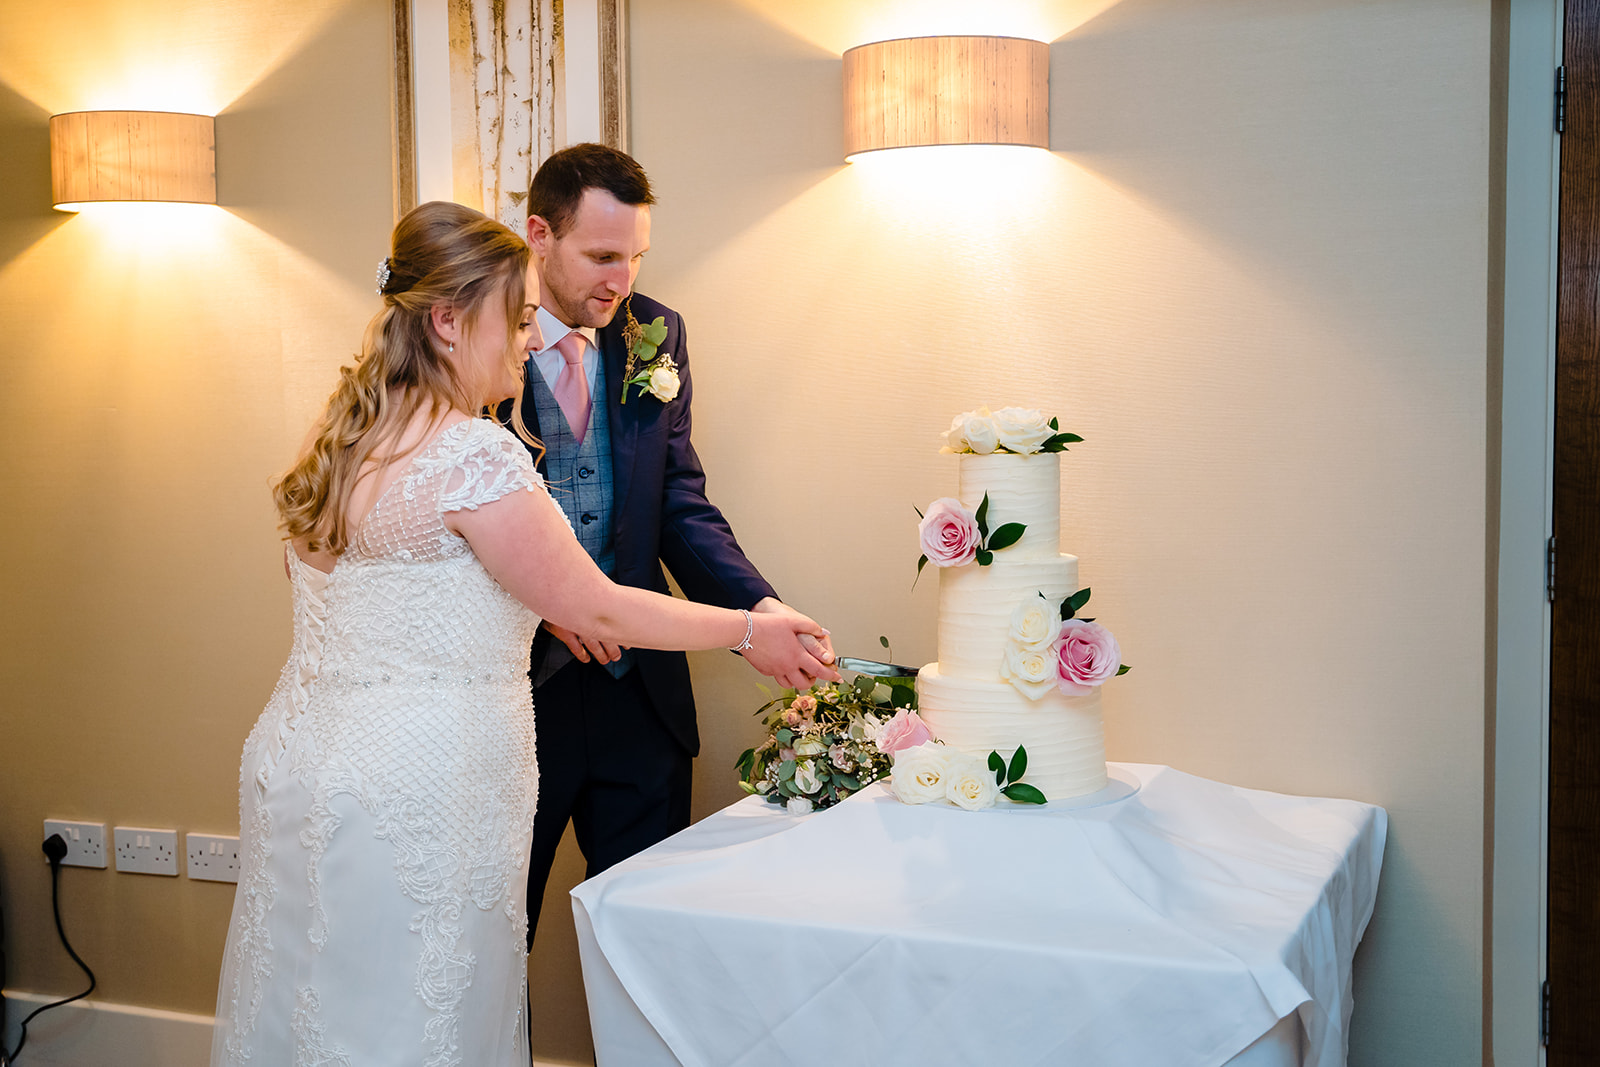 cake cutting at a 315 wedding in lepton